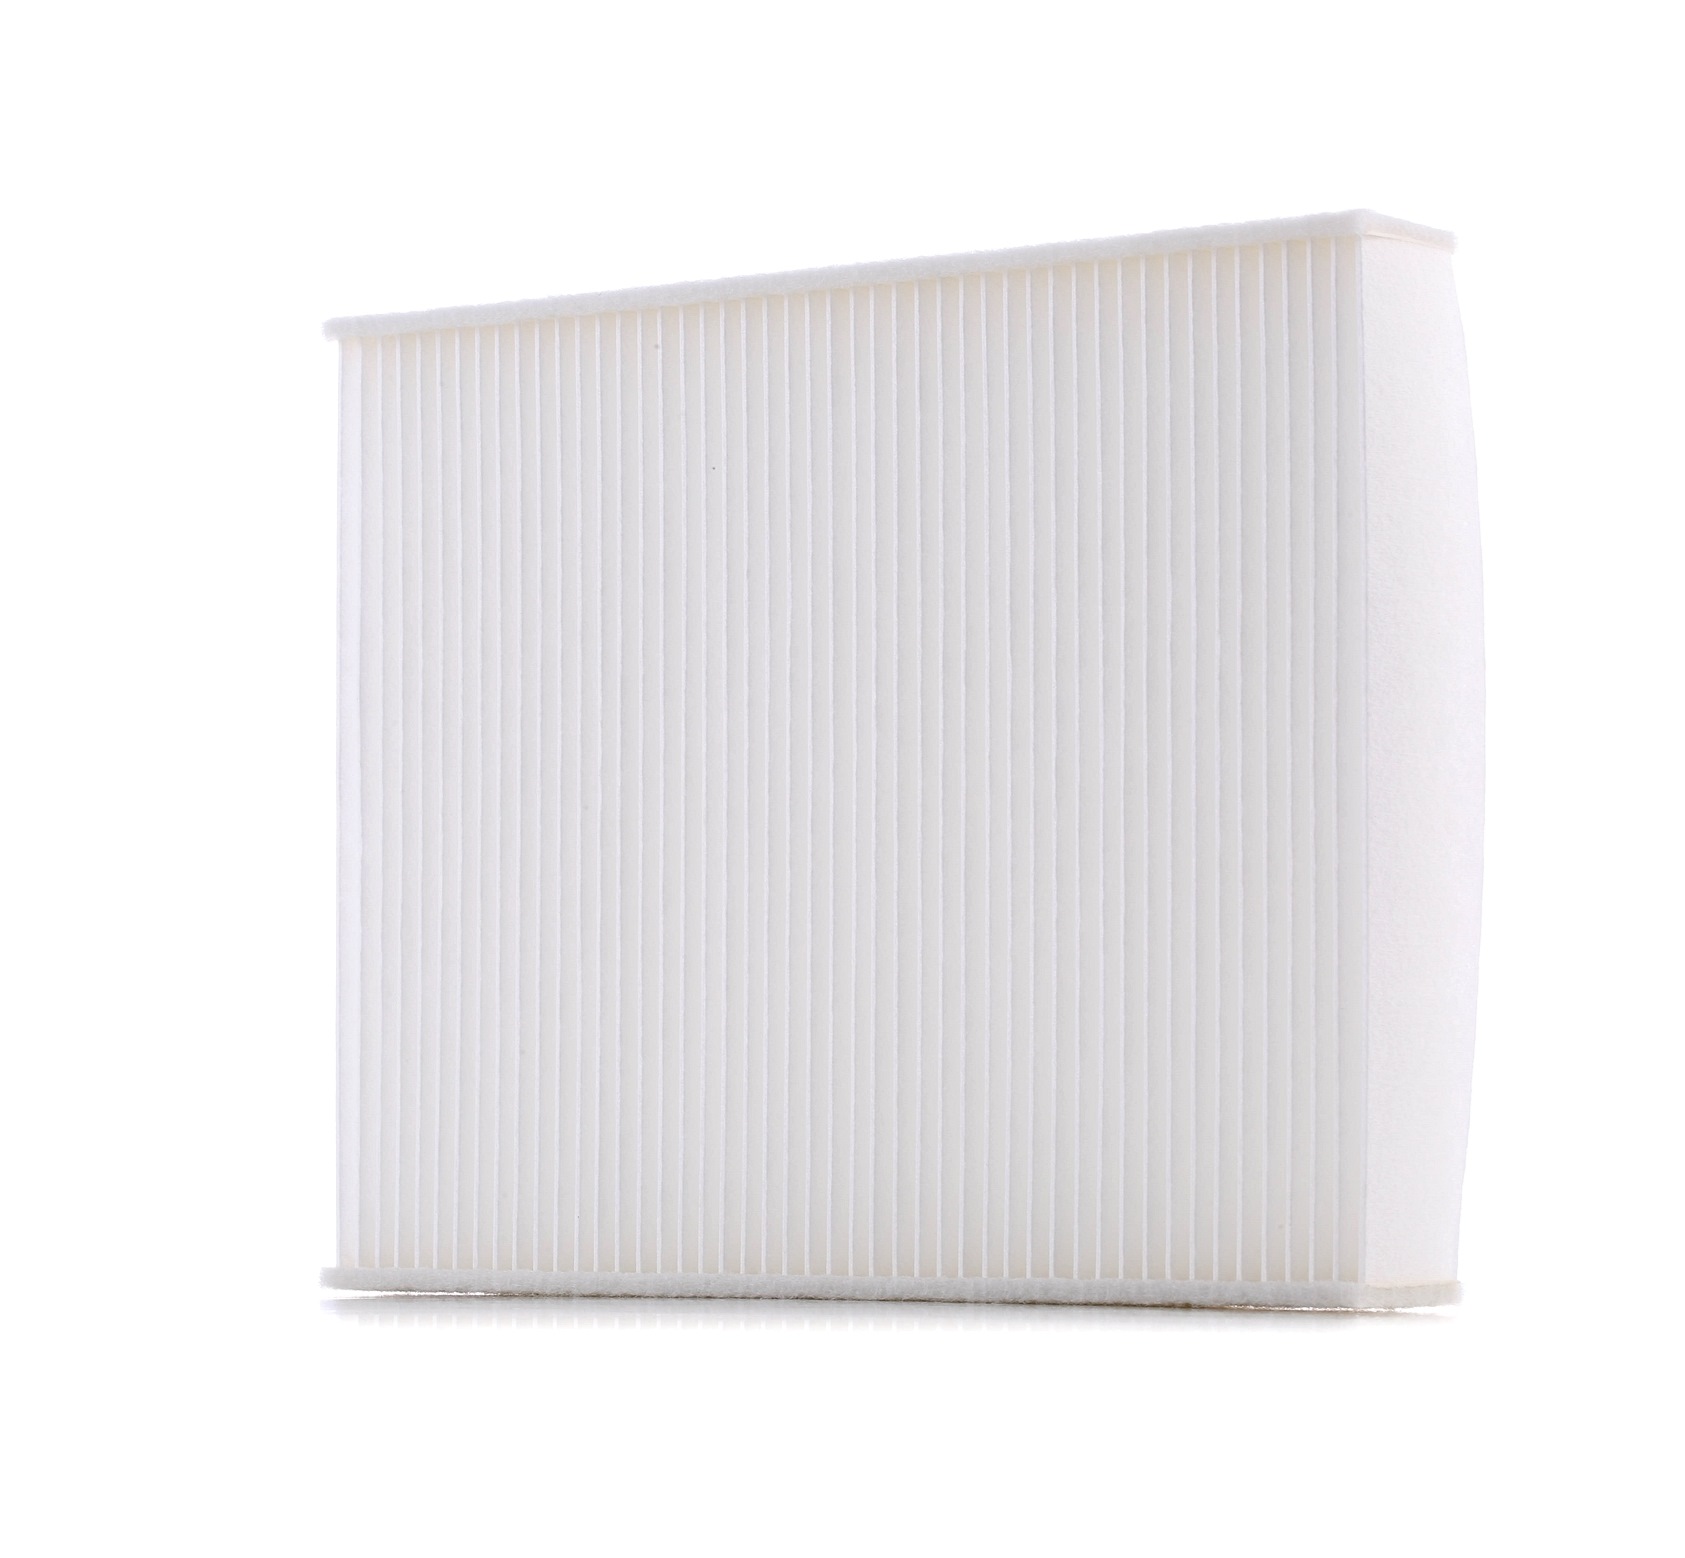 PURRO PUR-PC4004 Pollen filter Activated Carbon Filter, 239 mm x 190 mm x 34 mm